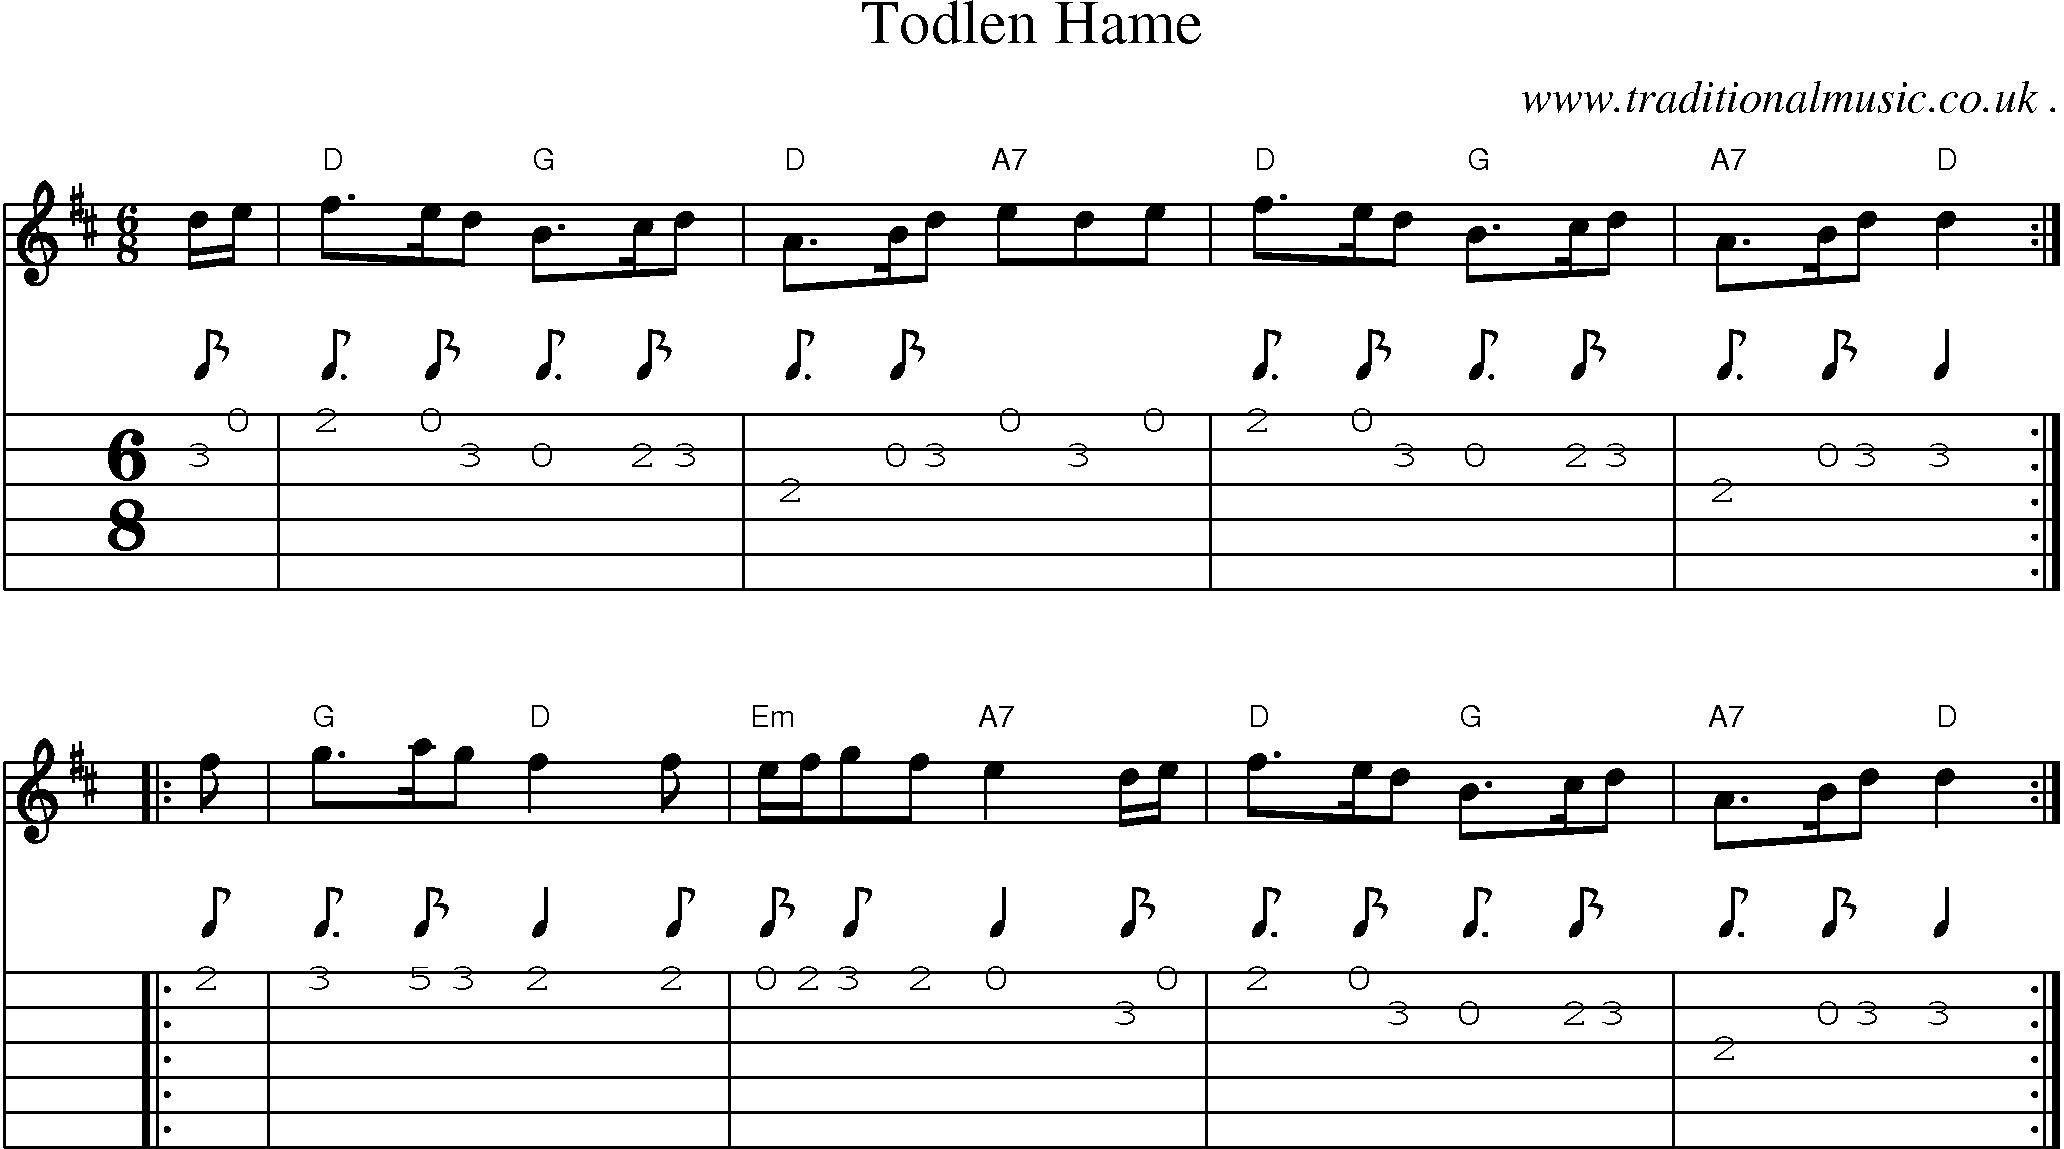 Sheet-music  score, Chords and Guitar Tabs for Todlen Hame